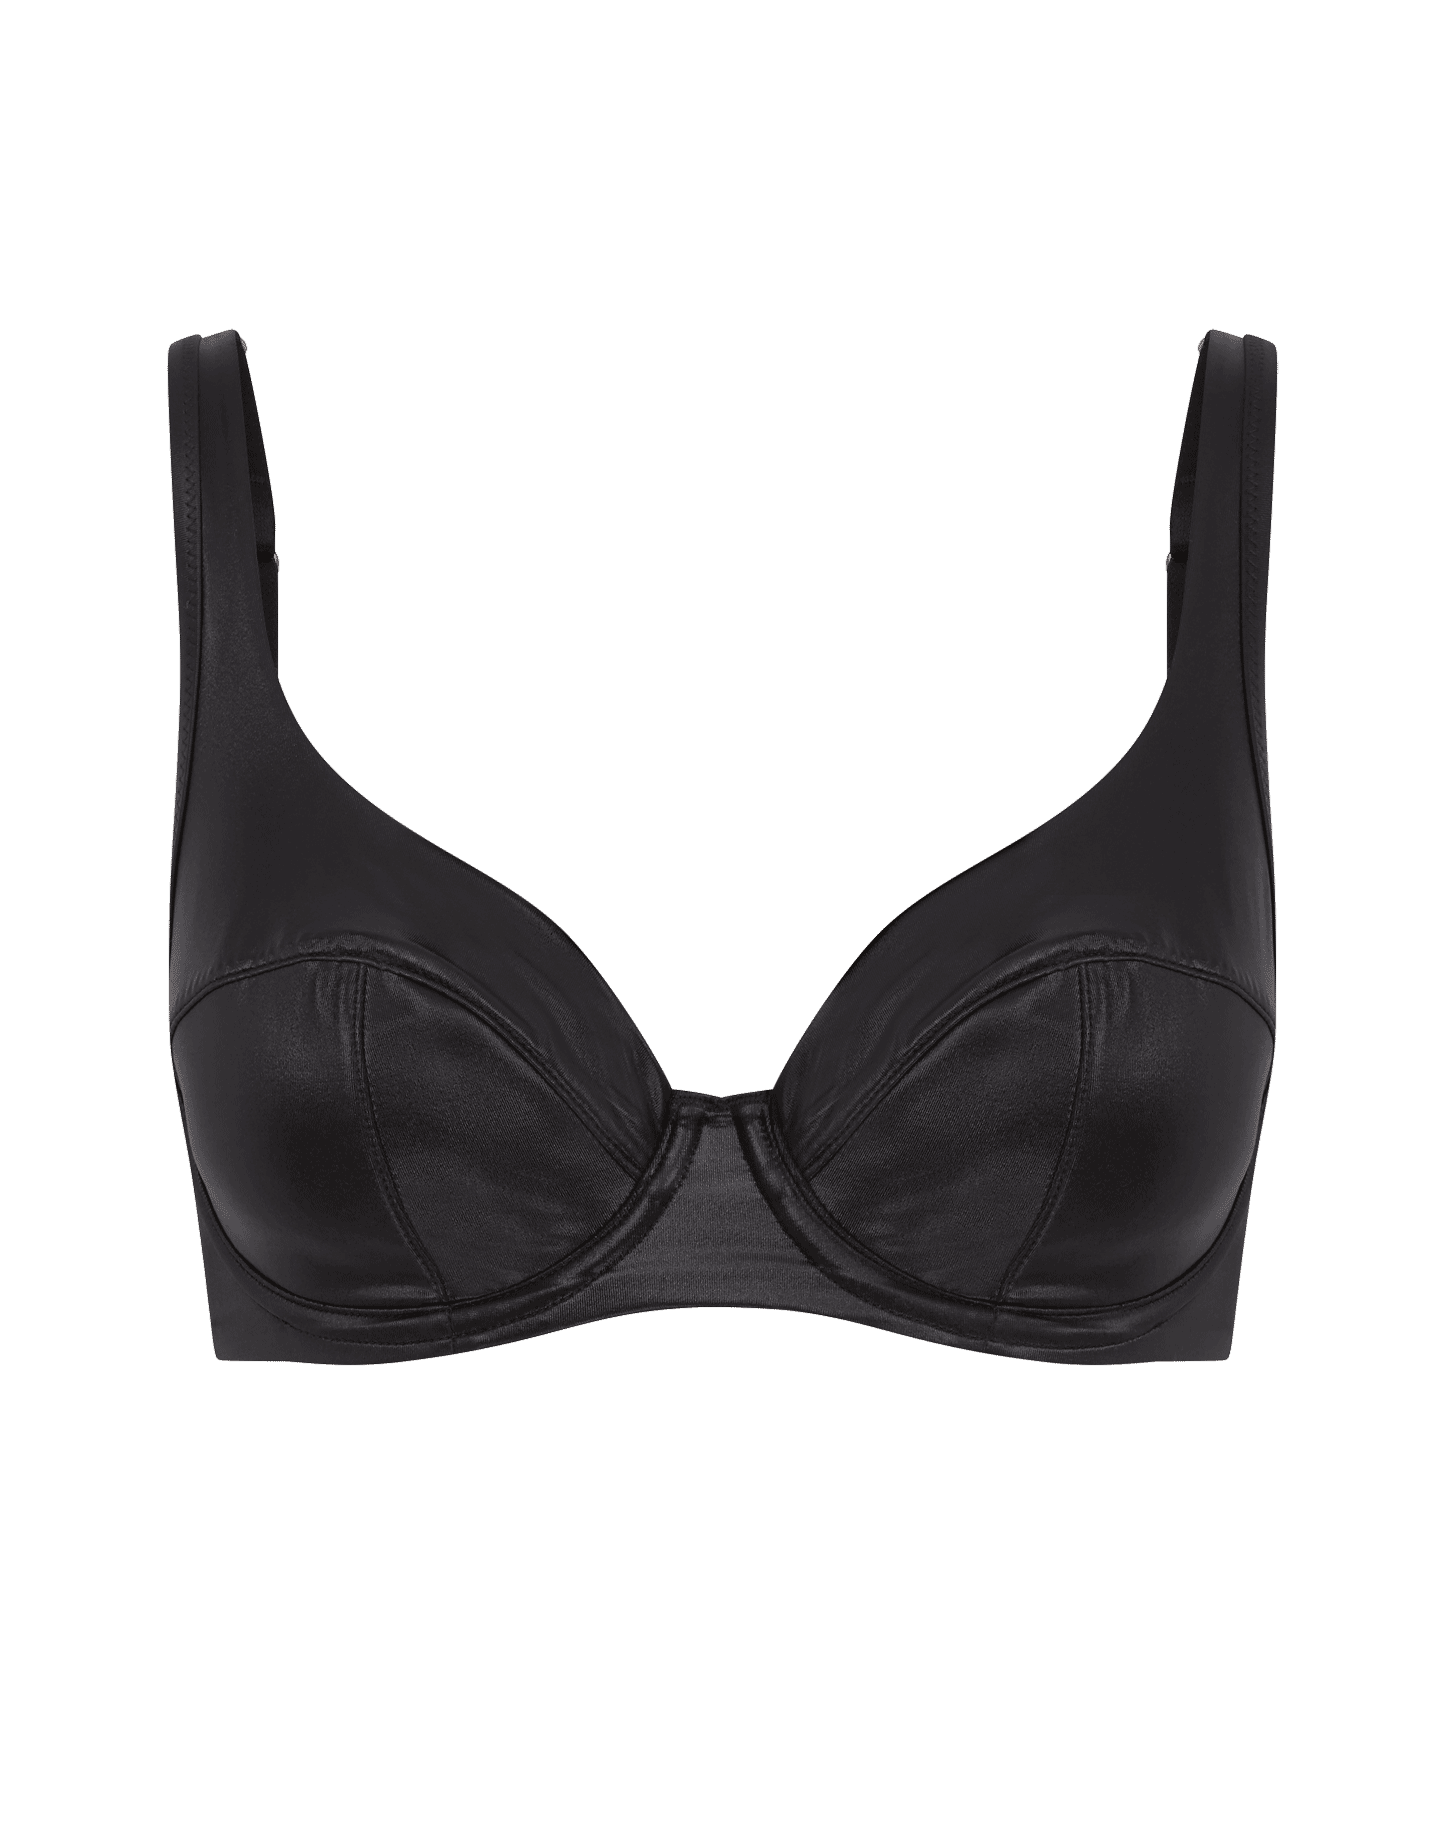 Paige Full Cup Underwired Bra in Black | Agent Provocateur